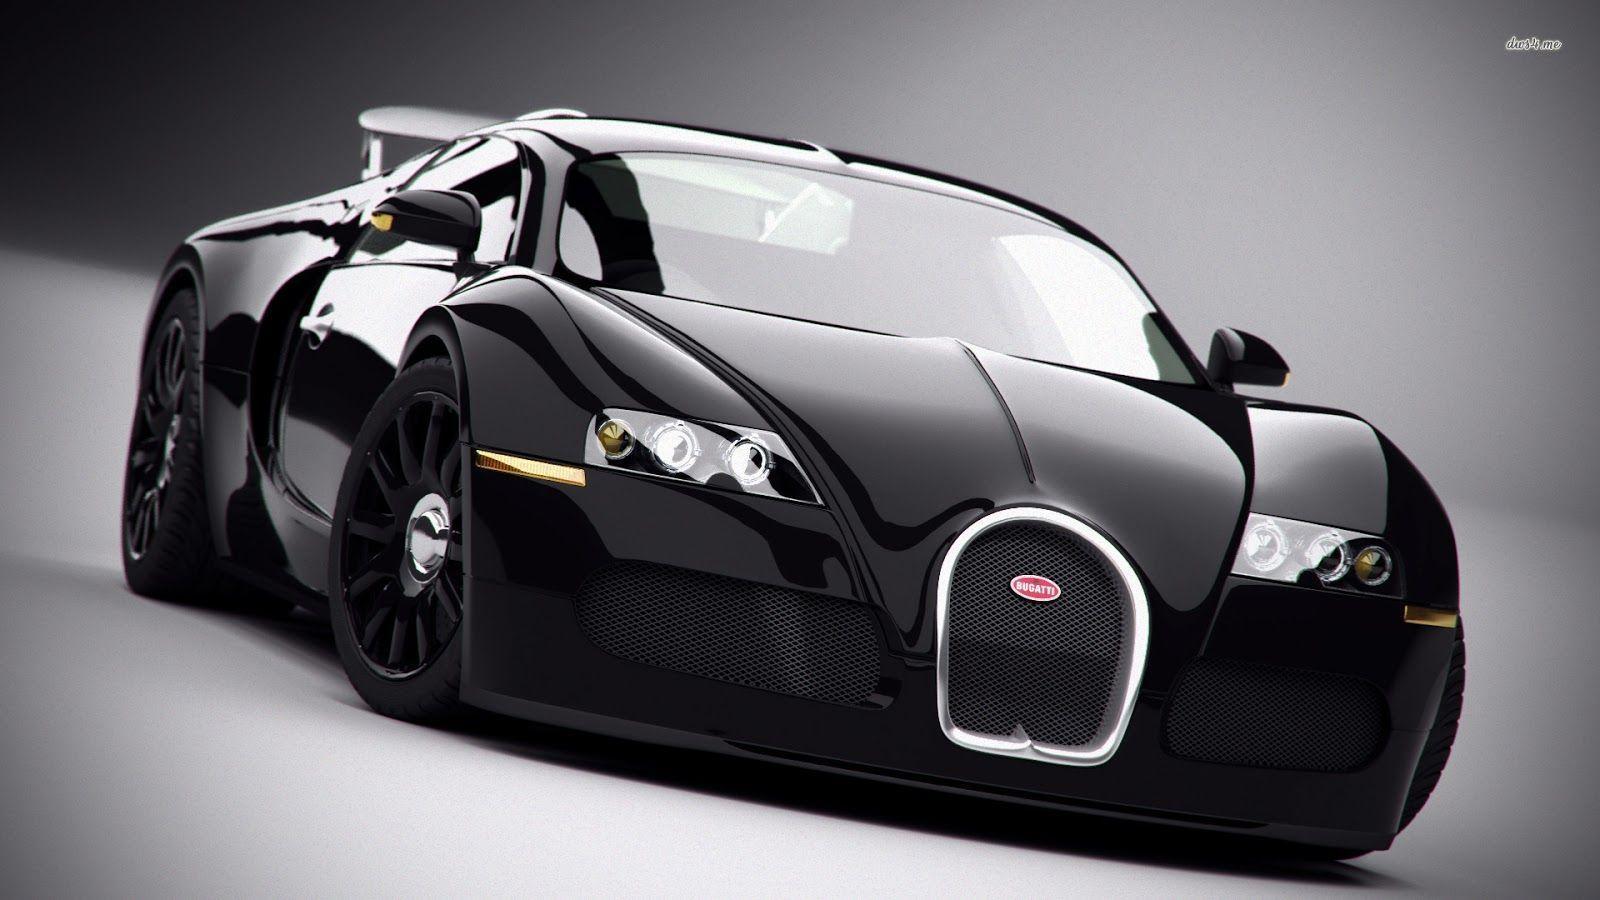 Fastest Car In The World Wallpaper. FASTEST